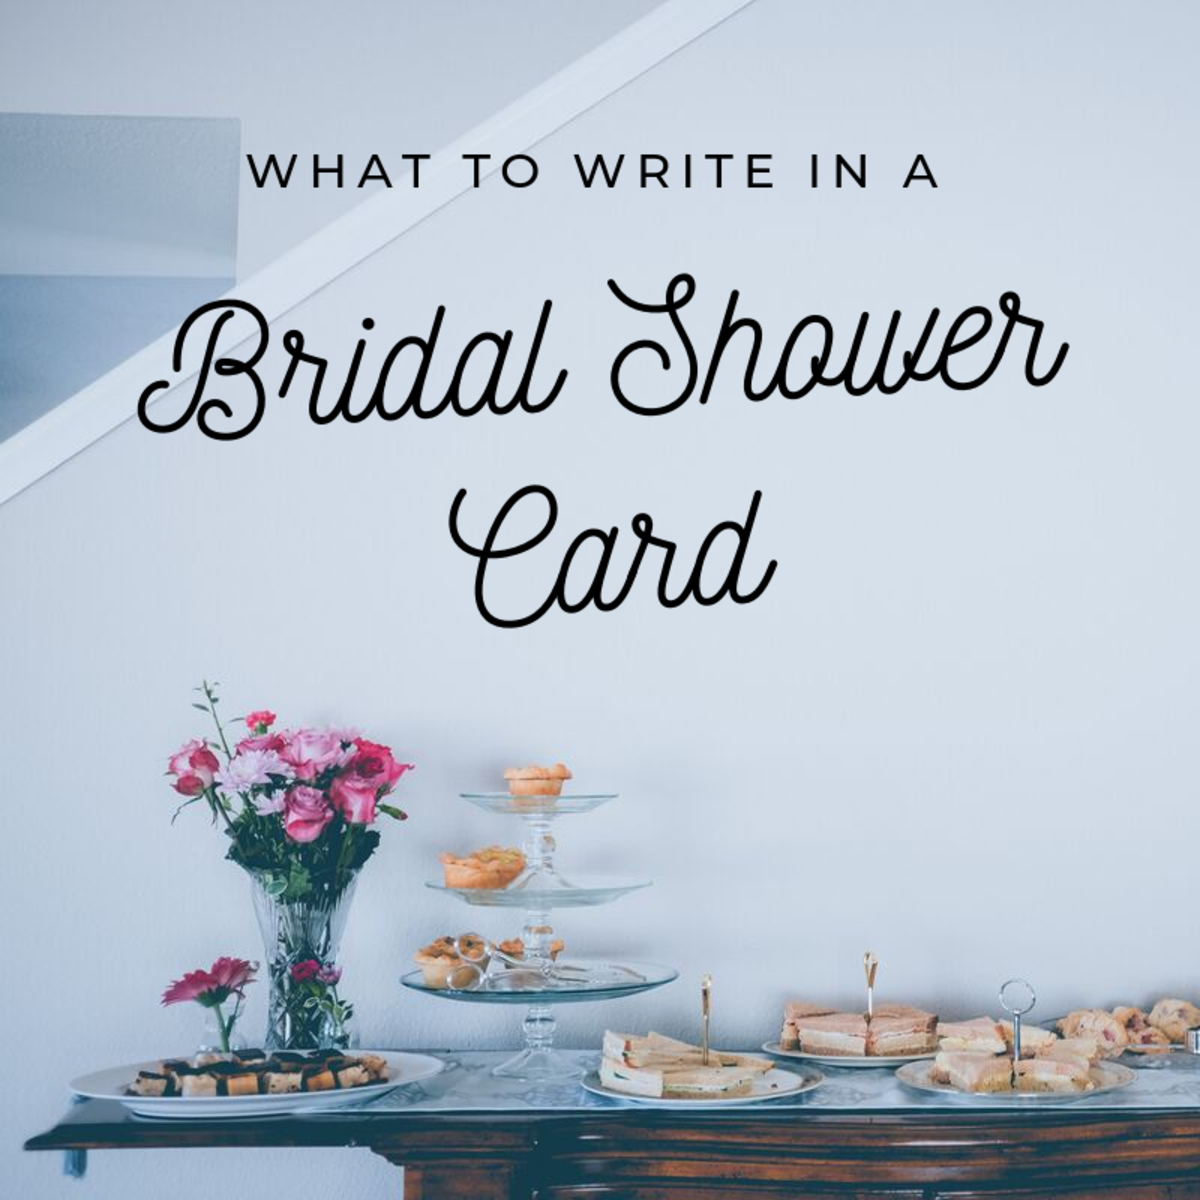 Example Bridal Shower Card Messages